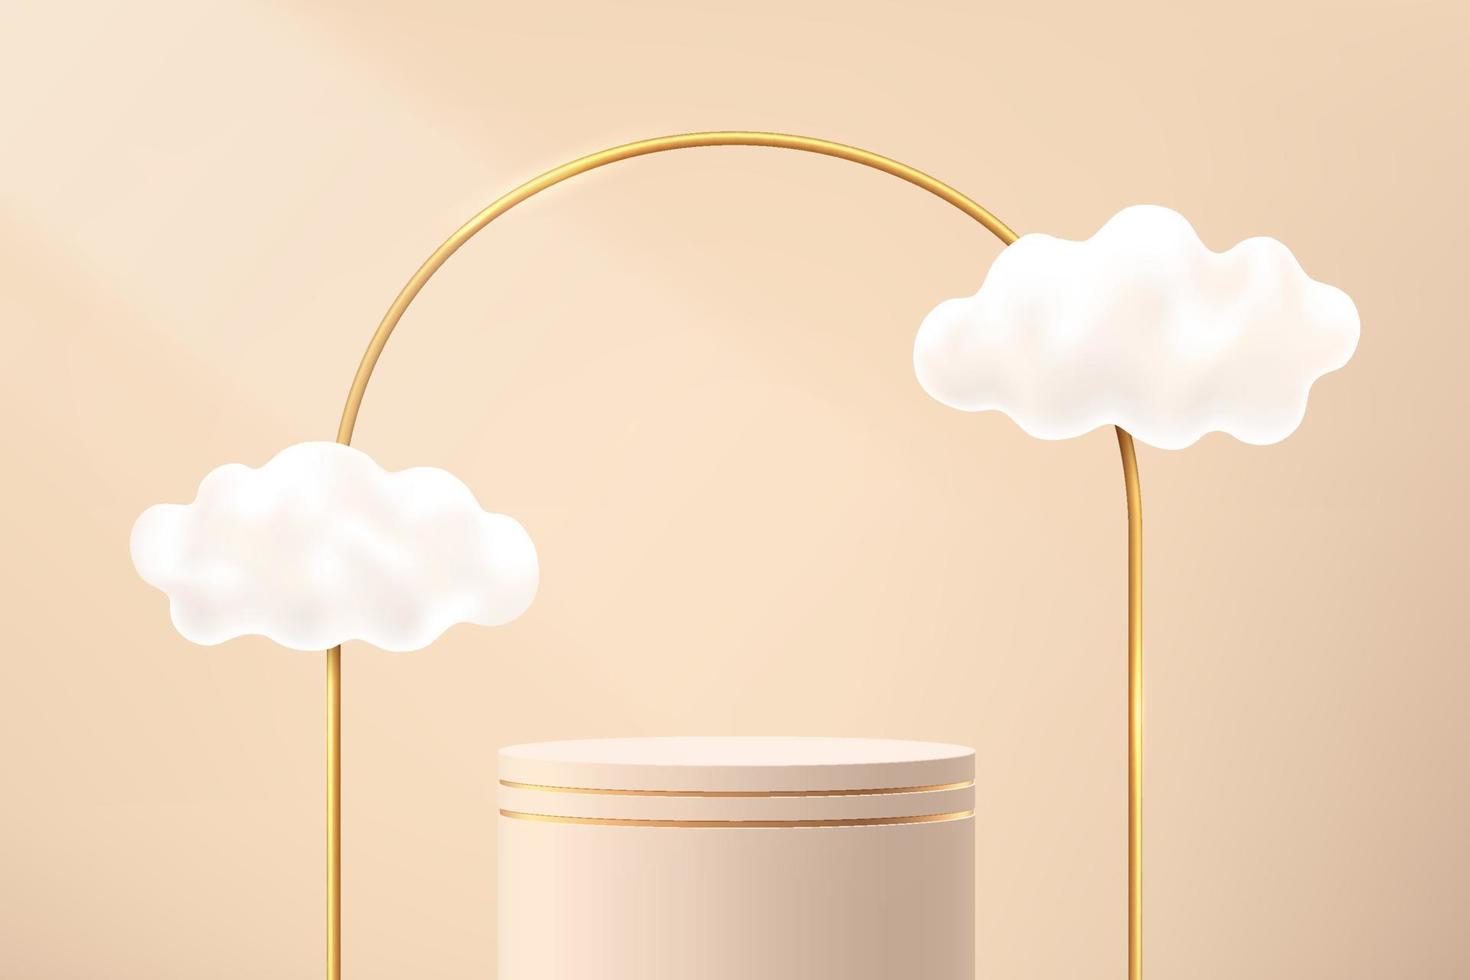 Abstract beige 3D cylinder pedestal or stand podium with golden arches and cloud flying. Luxury light brown minimal scene for cosmetic product display presentation. Vector geometric rendering platform